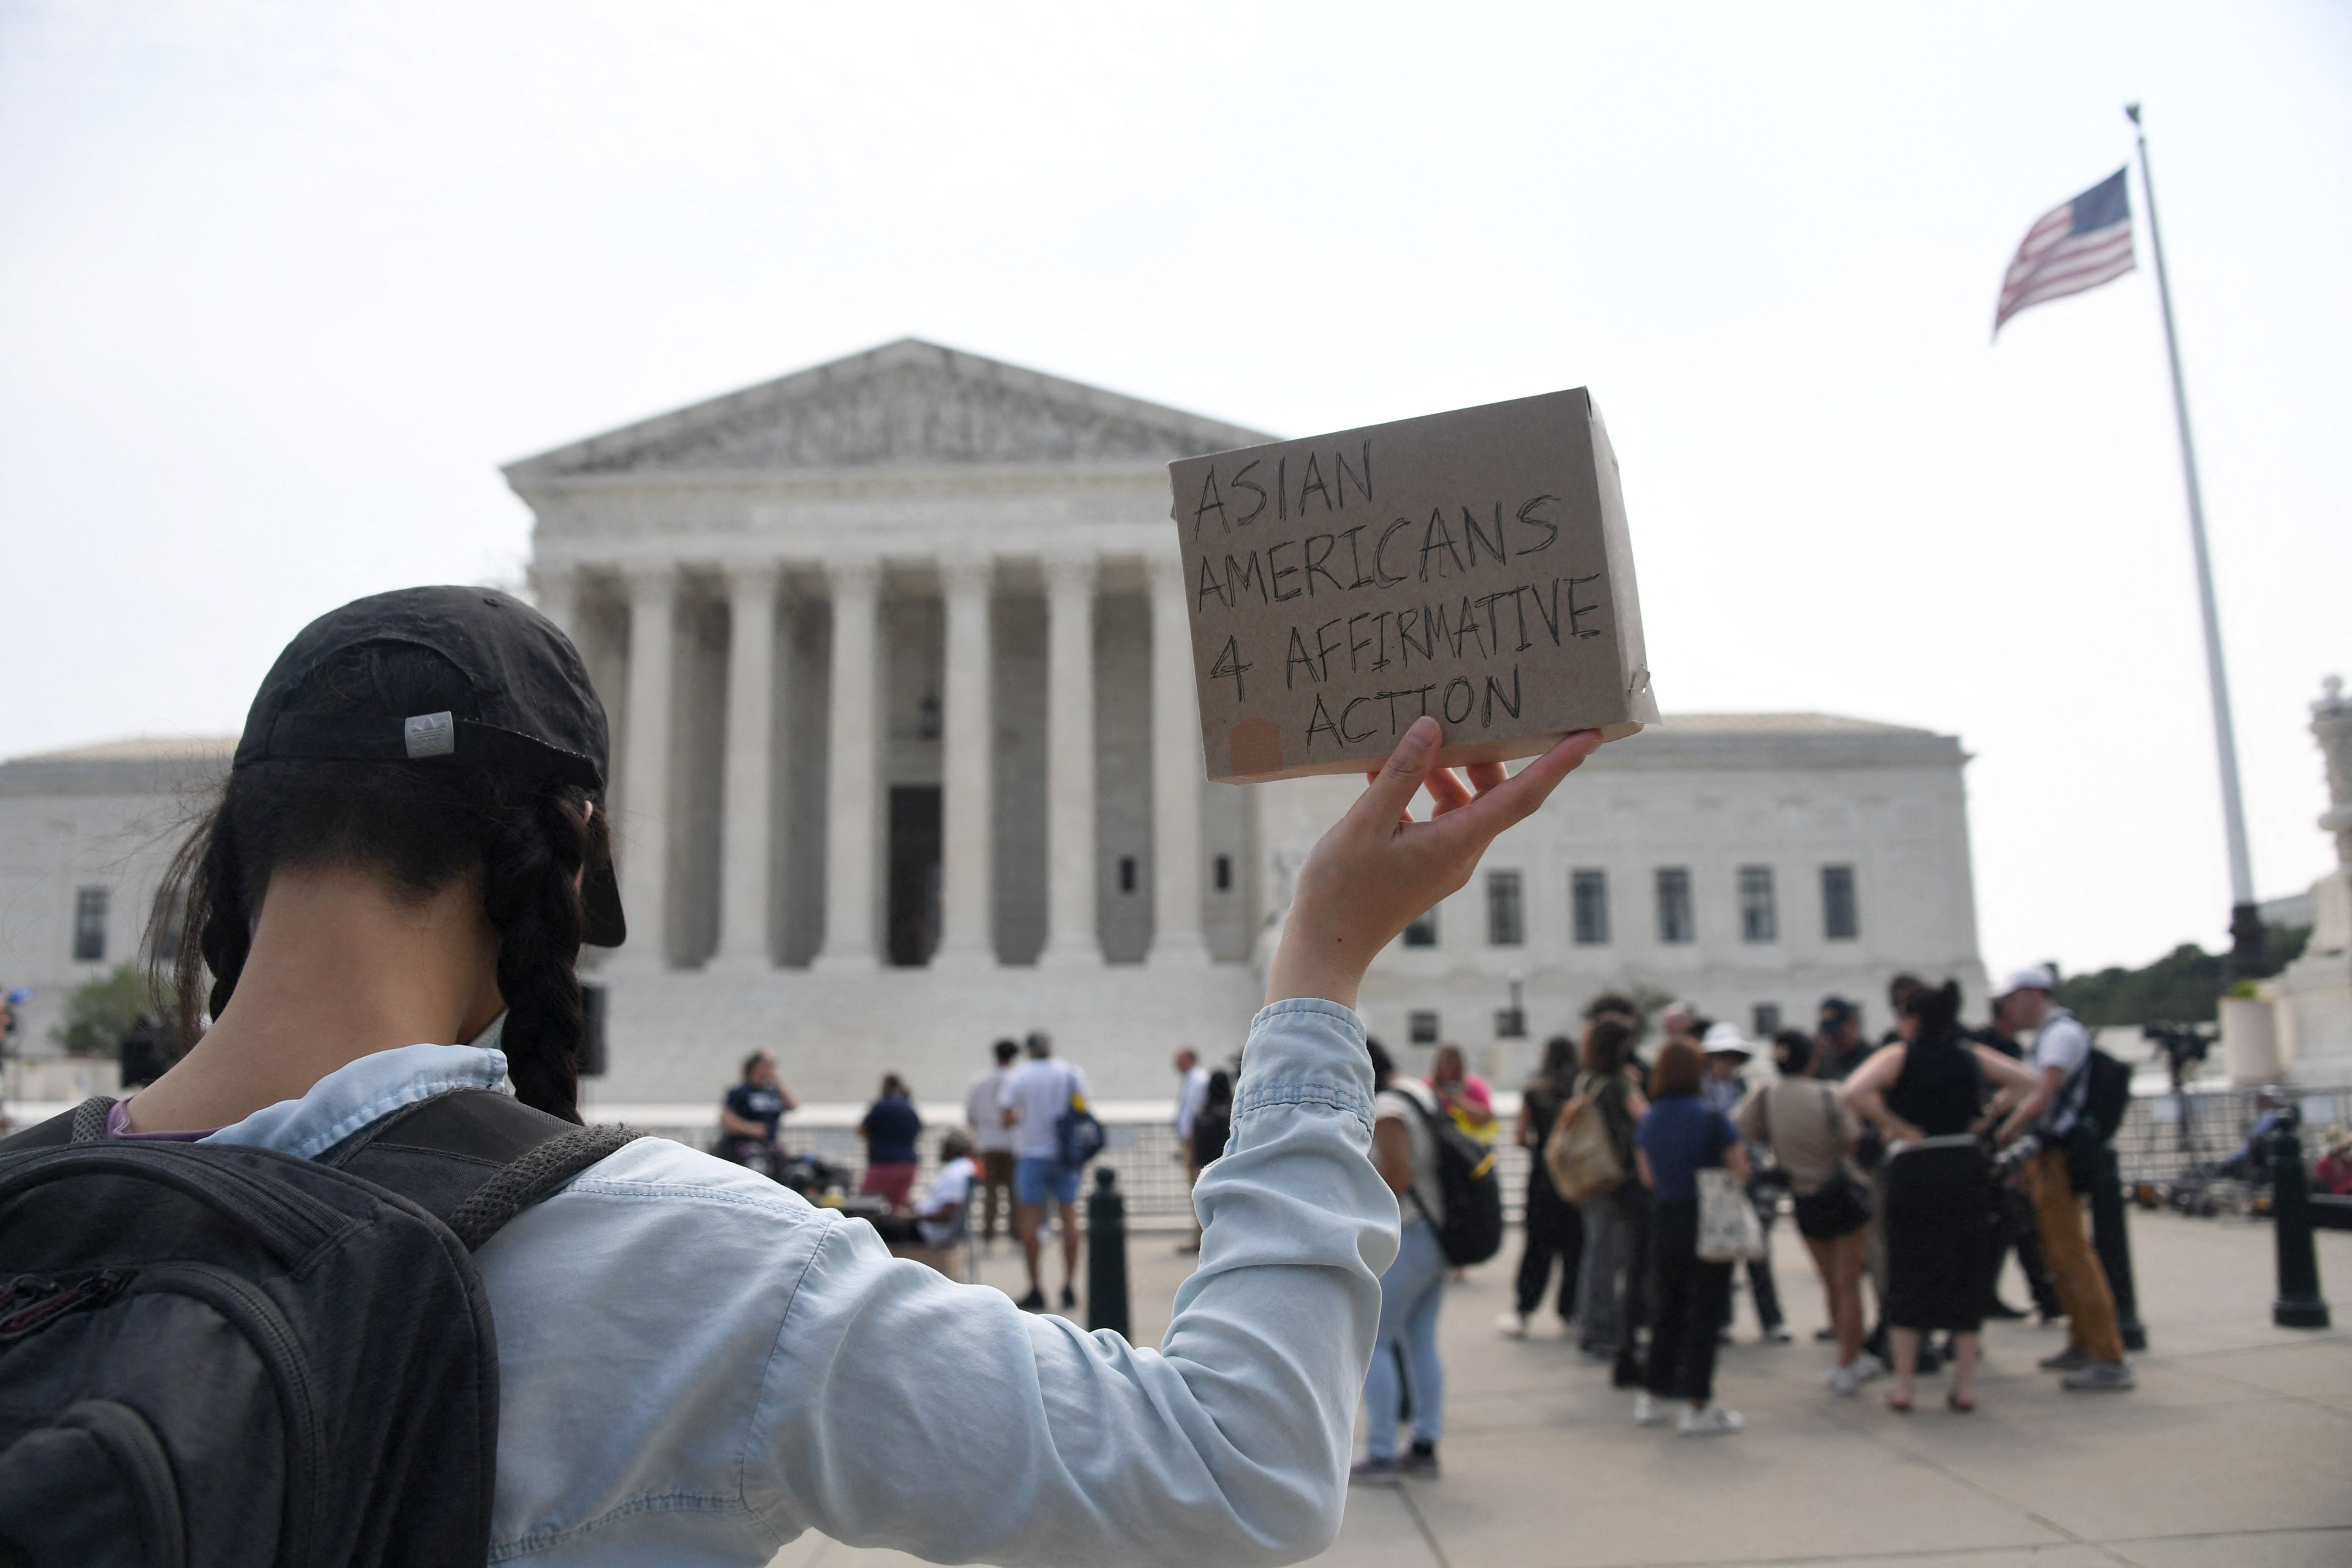 How to Protect Diversity in Education from the Supreme Court's Assault